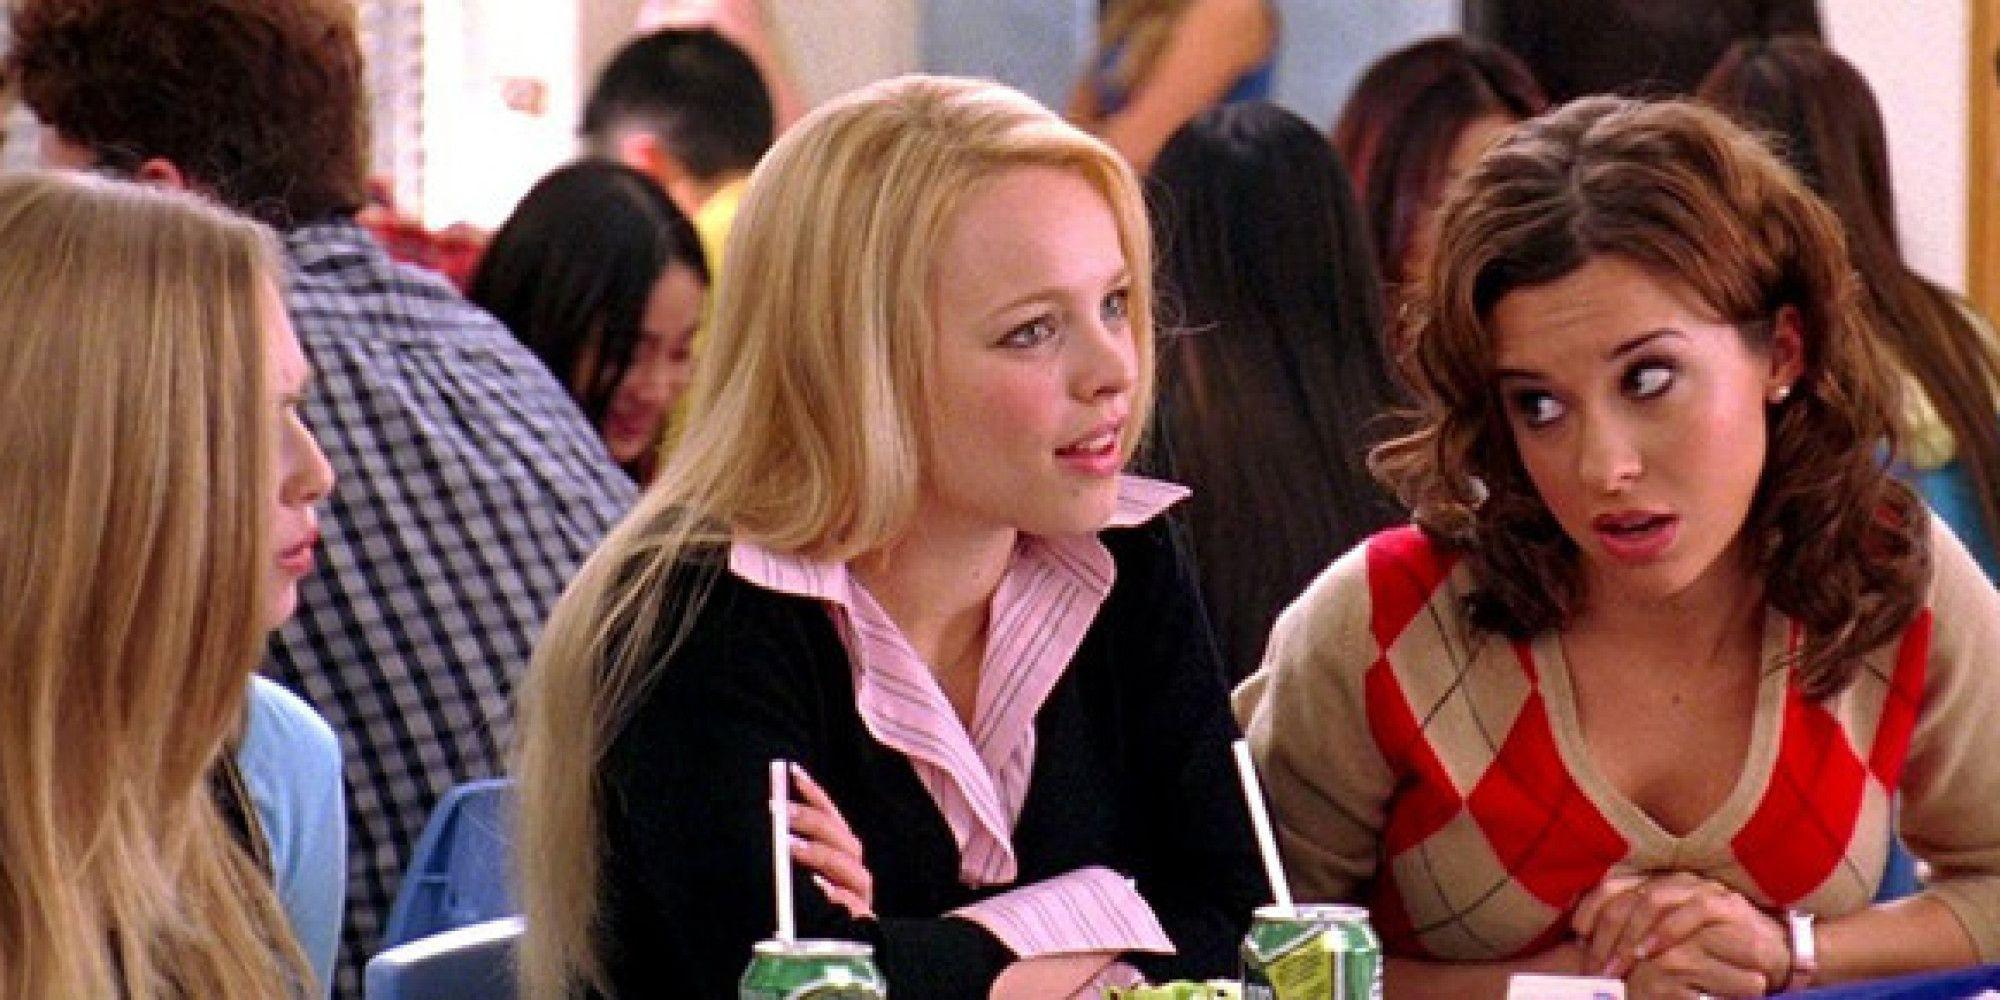 Mean Girls: The Movie for Teens 10 Years Later.